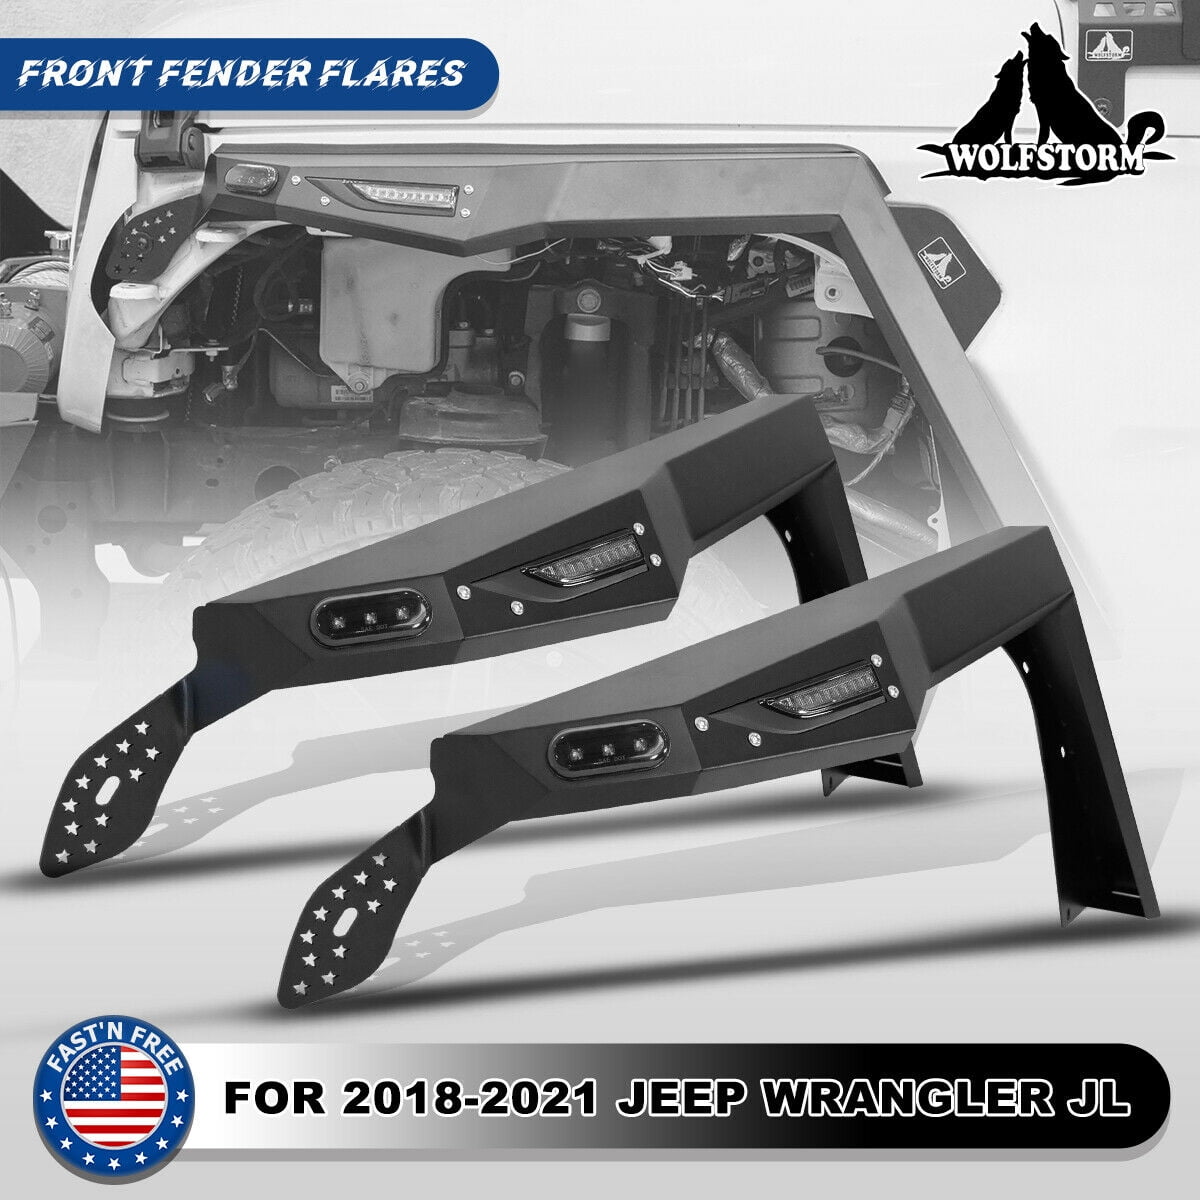 WOLFSTORM Front Fender Flares Fit for 2018-2021 Jeep Wrangler JL 4 Doors/2  Door,LED DRL Lights and Sequential LED Turn Lights,Jeep Wrangler JL/JLU  Fender Flares Replacement Exterior Accessories - Walmart.com